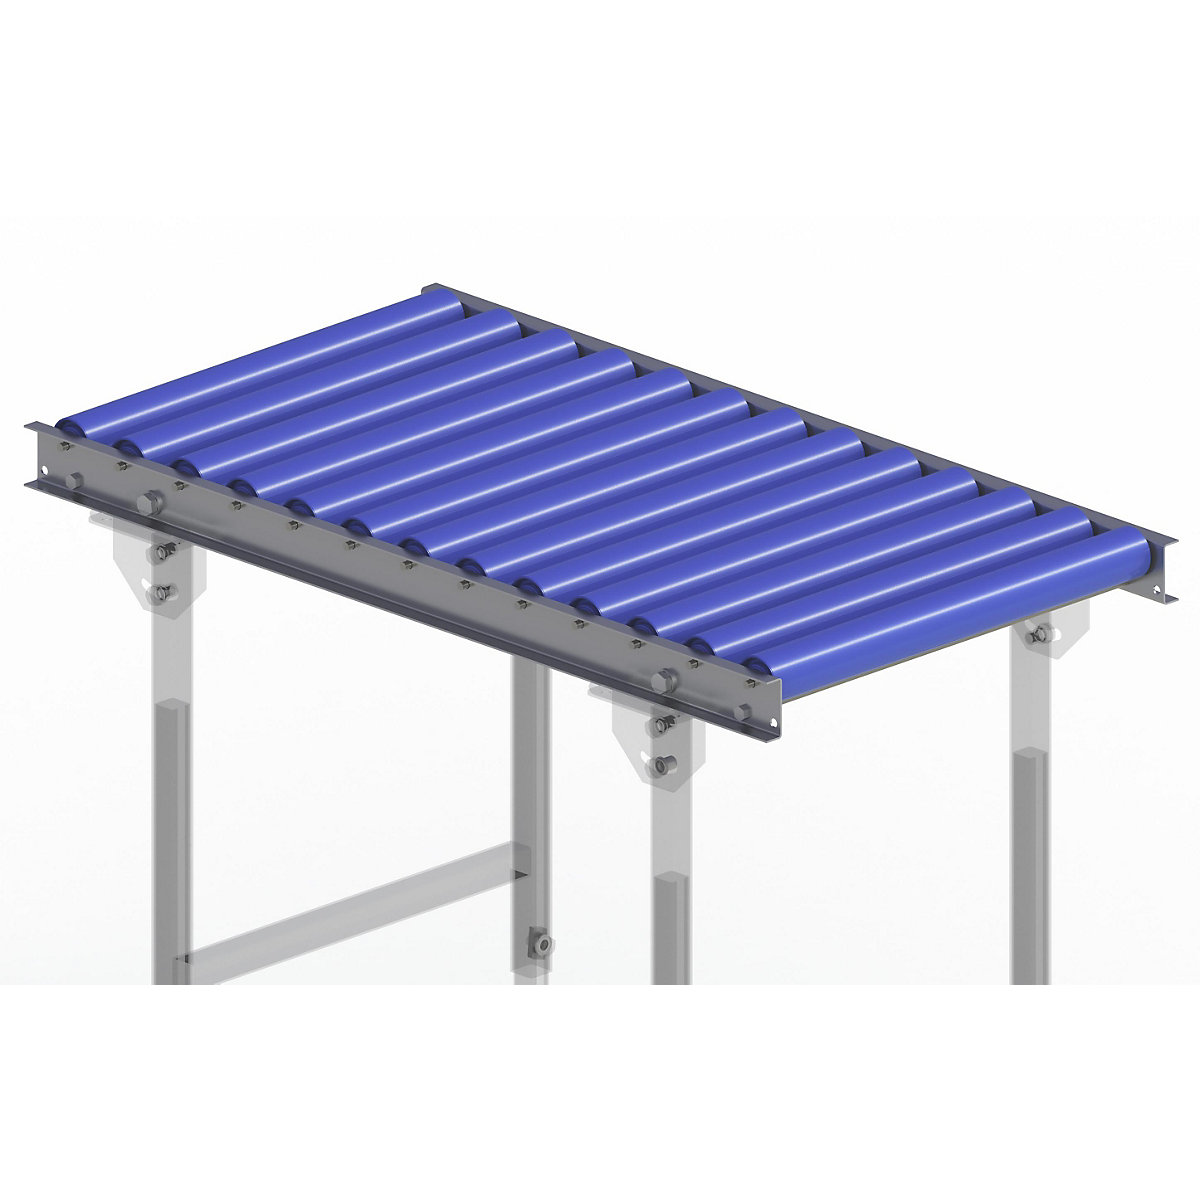 Gura – Light duty roller conveyor, steel frame with plastic rollers, track width 500 mm, axle spacing 75 mm, length 1 m